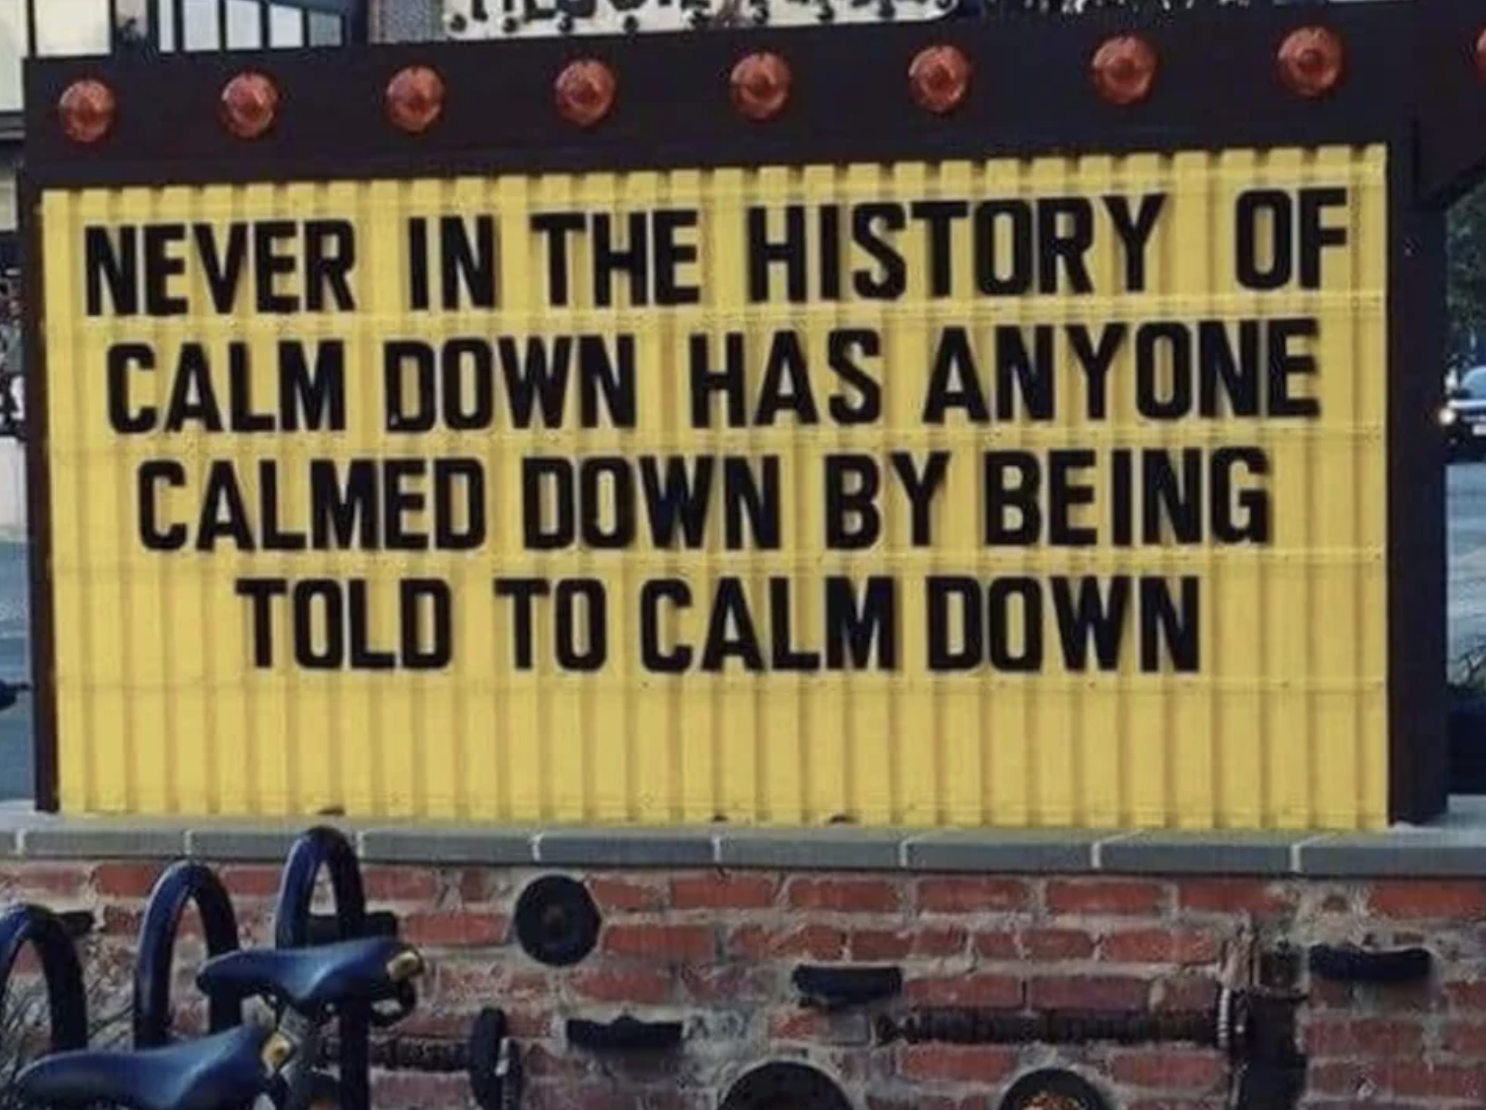 Sign reads &quot;NEVER IN THE HISTORY OF CALM DOWN HAS ANYONE CALMED DOWN BY BEING TOLD TO CALM DOWN&quot;